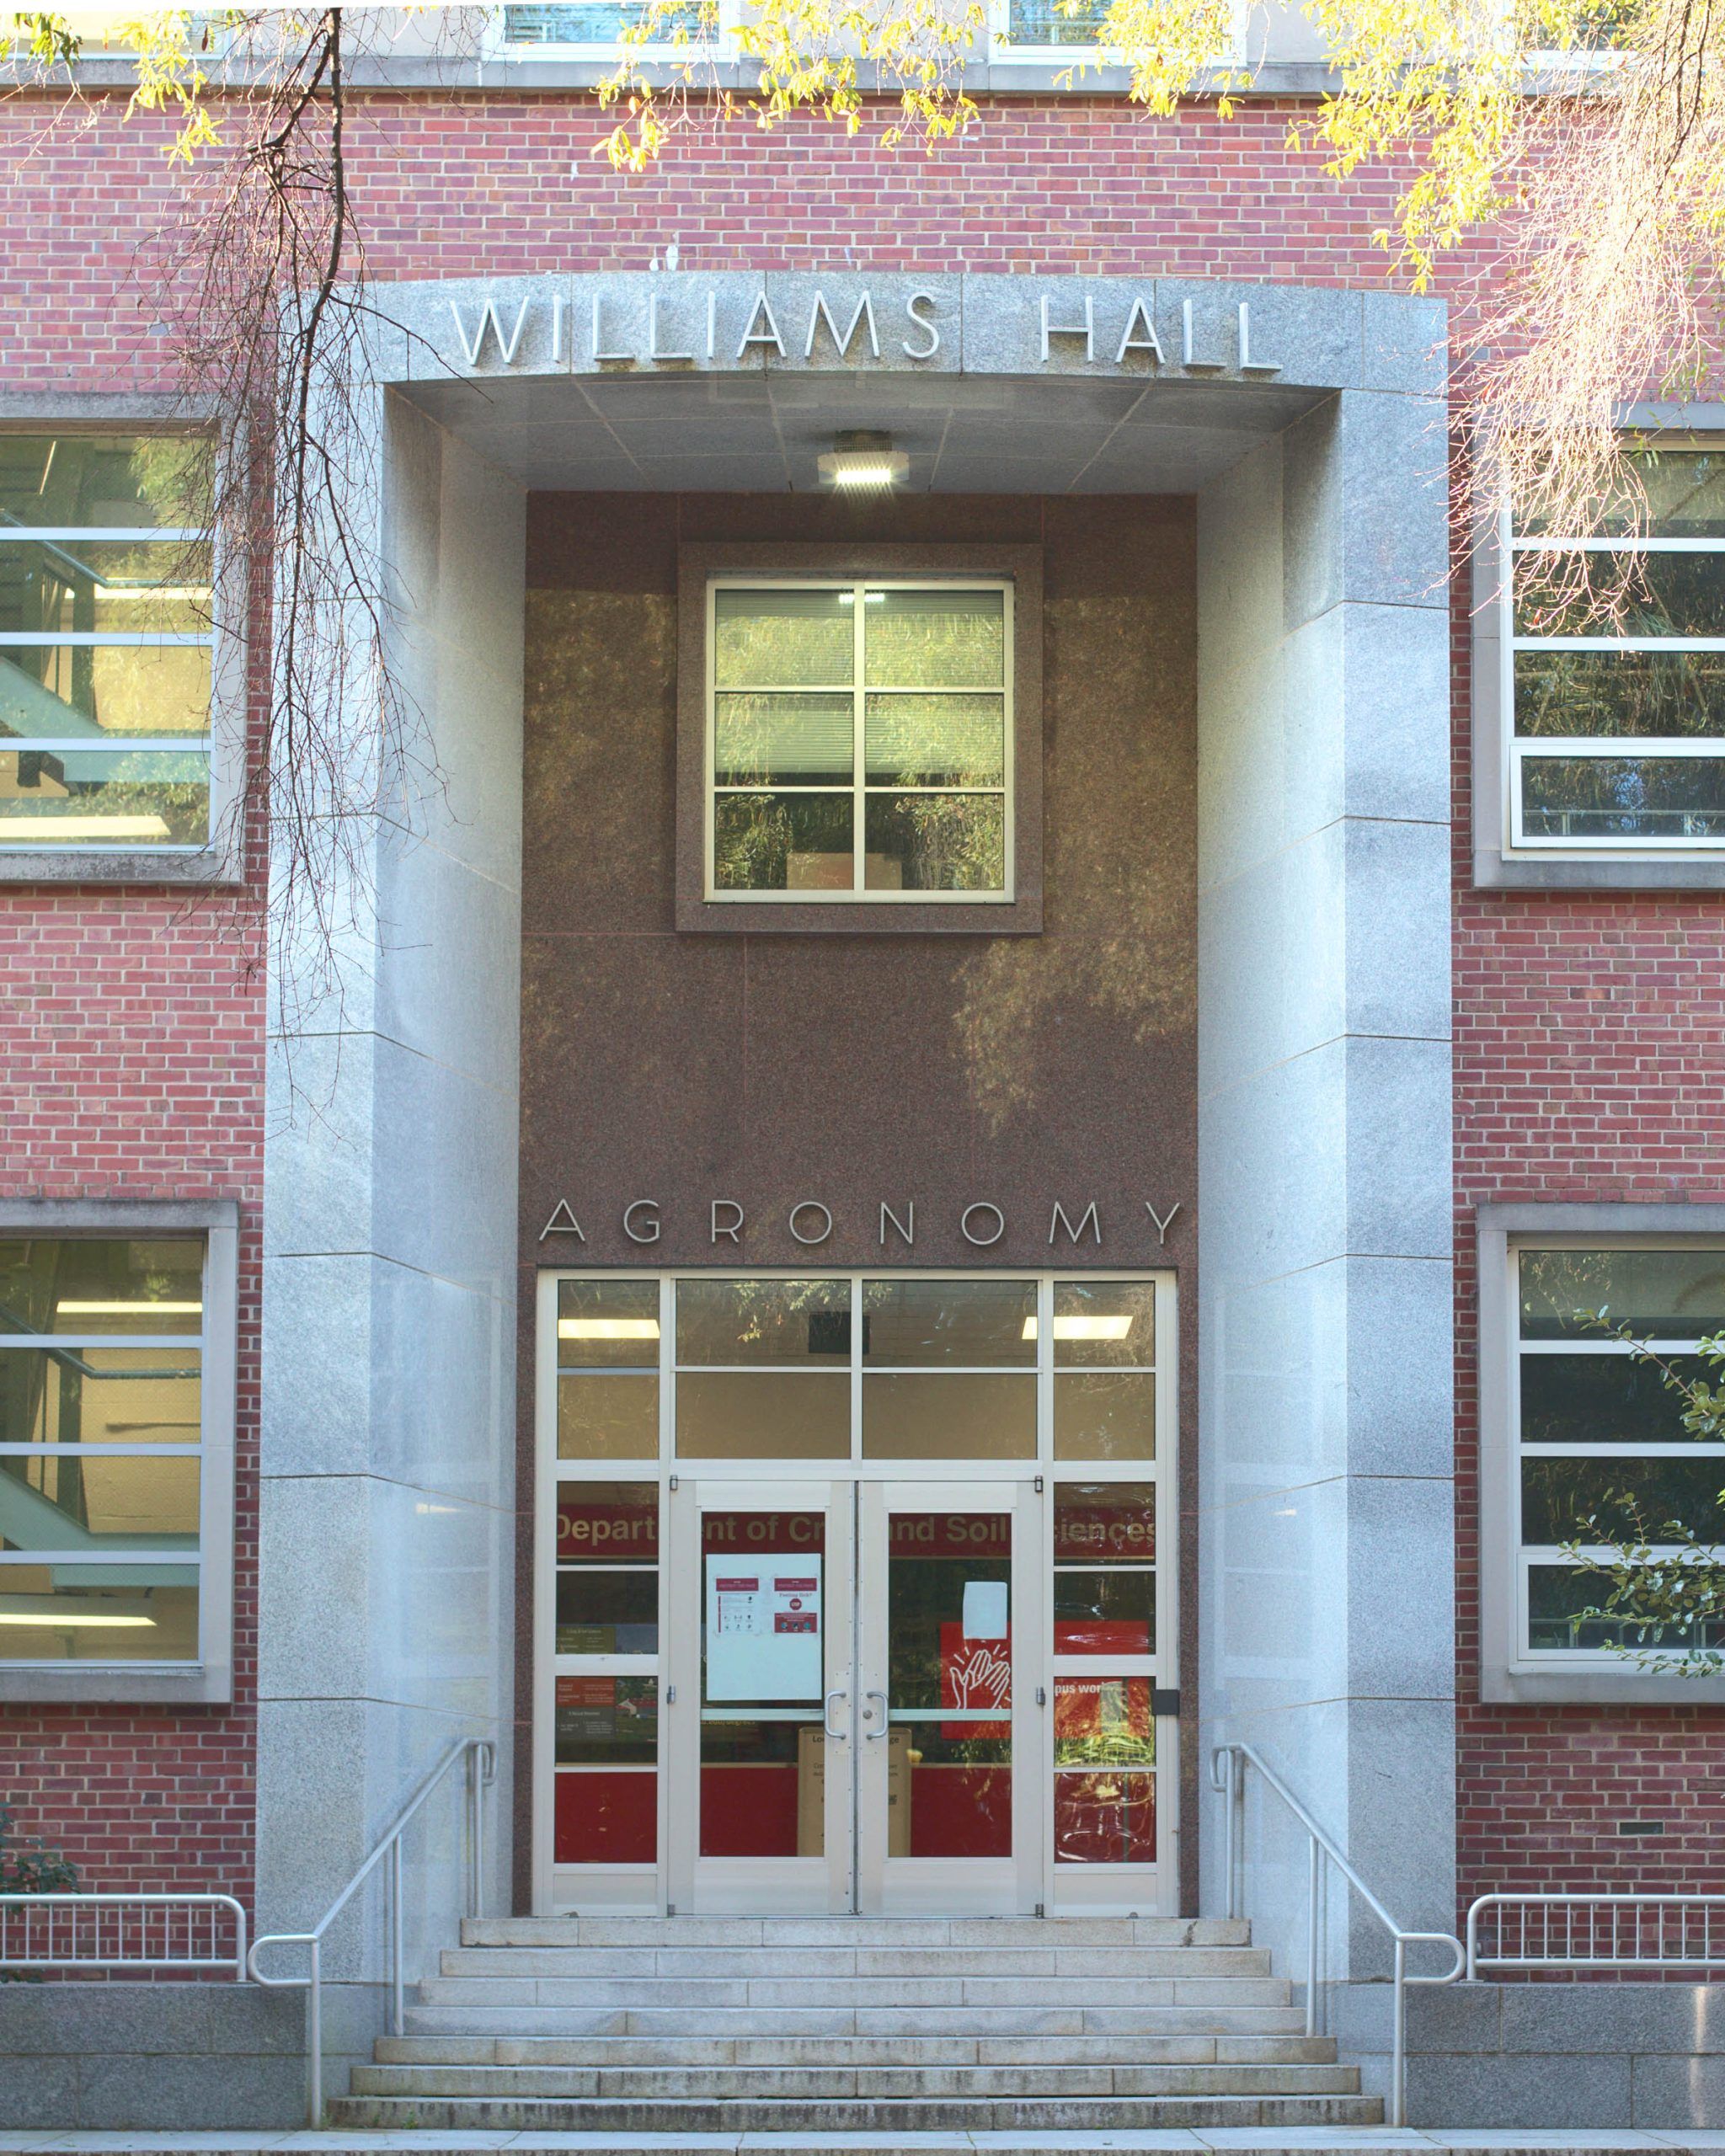 The front doors of NC State's Williams Hall